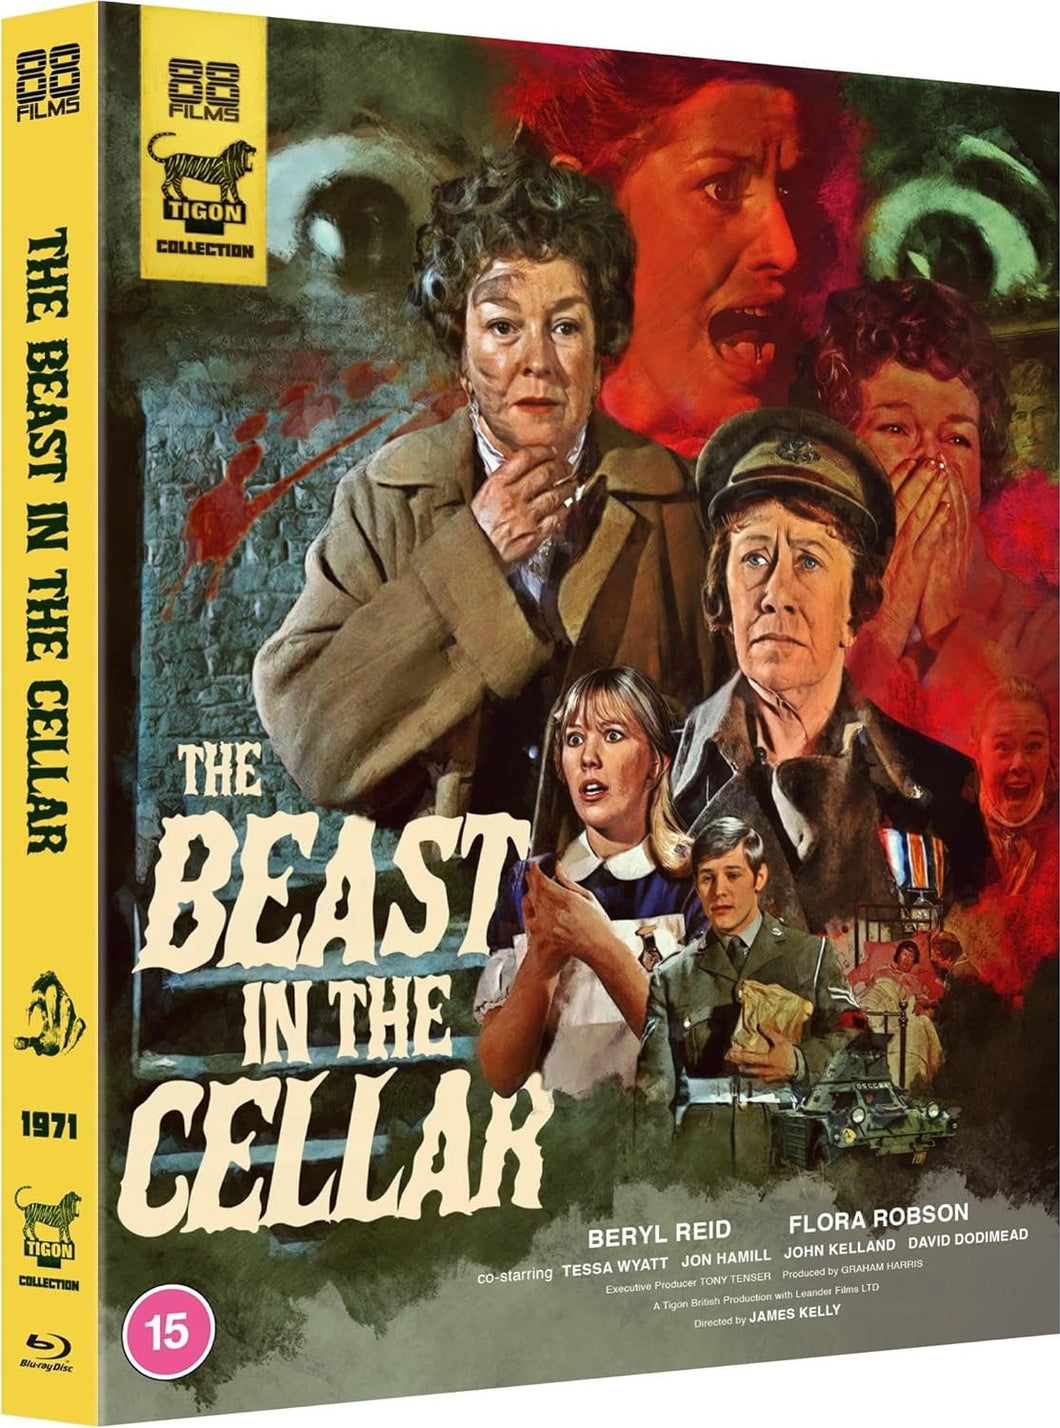 The Beast in the Cellar - front cover